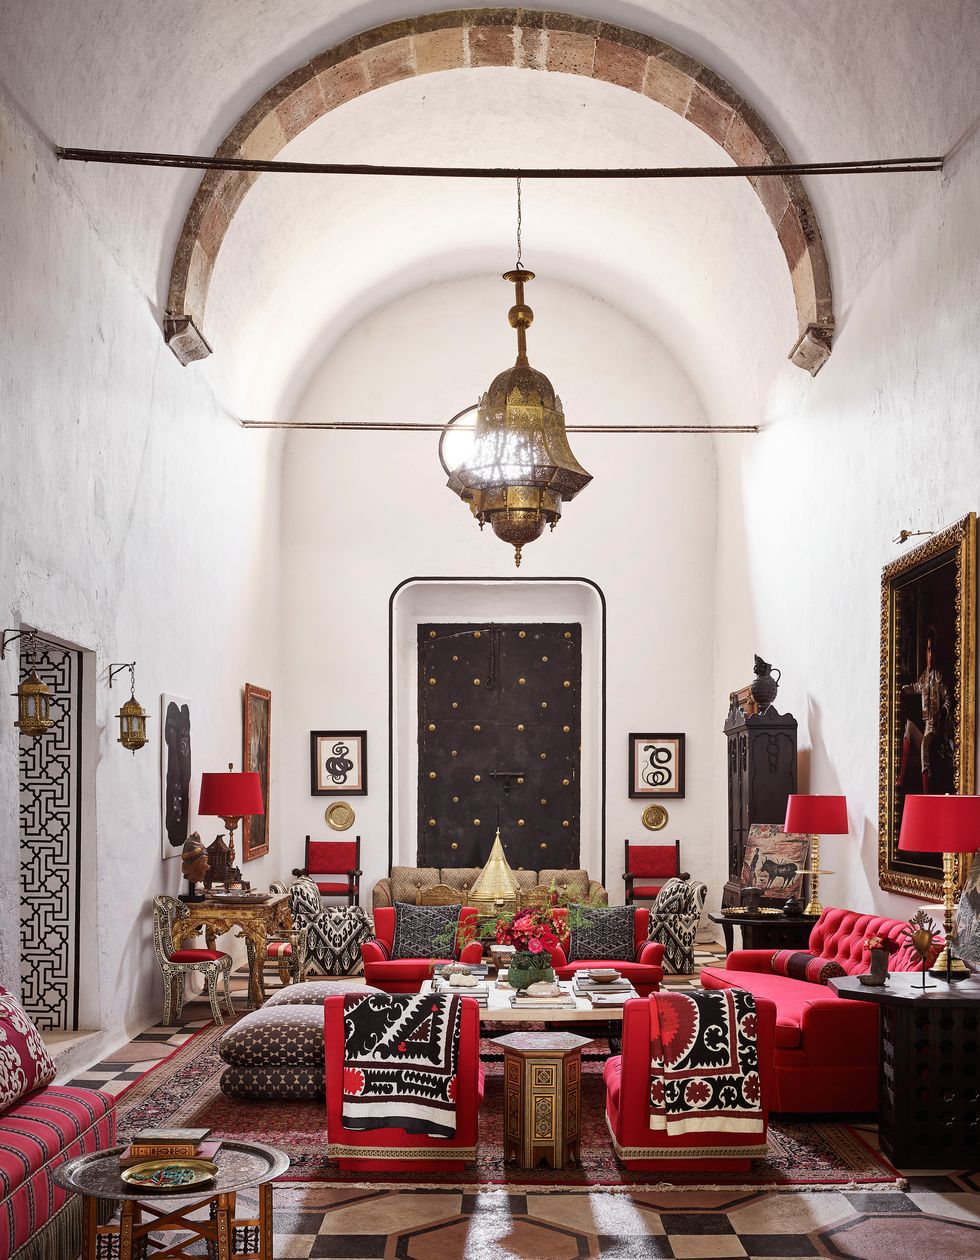 A colonial Mexican hacienda in eclectic style